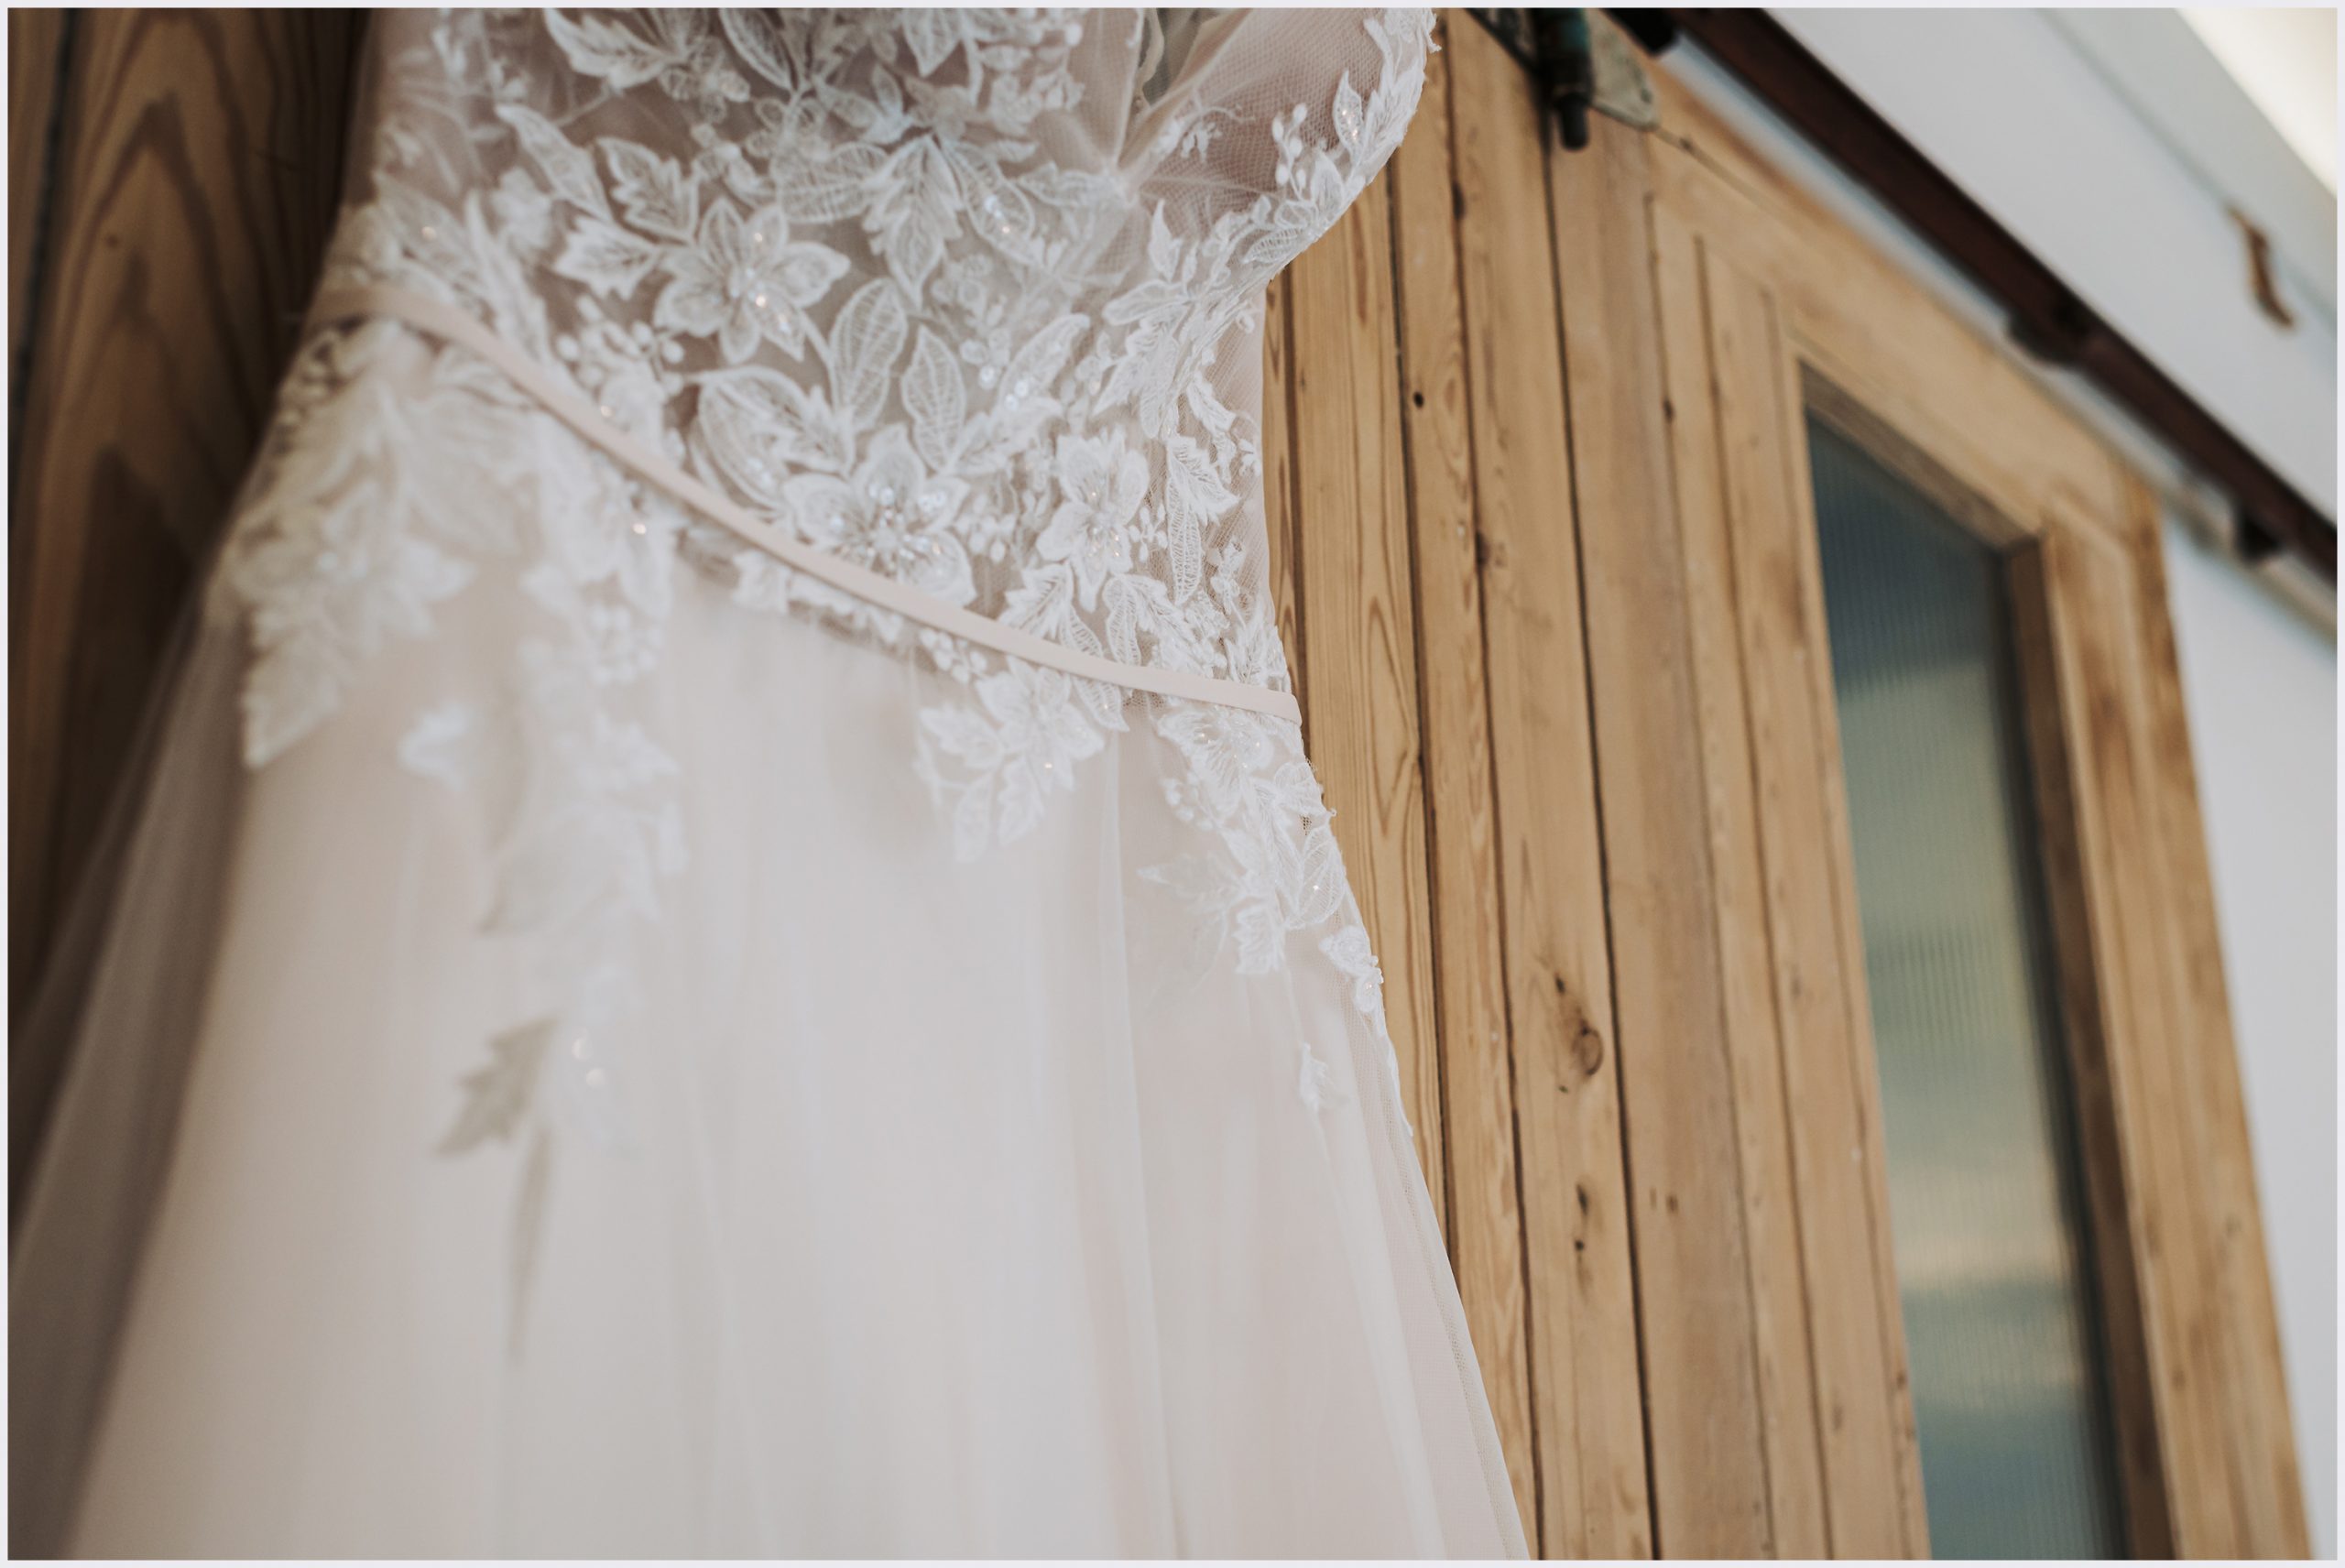 A close up shot of the lace detail of a bride's beautiful wedding dress hanging against rustic stable doors taken by North Wales Wedding Photographer Helena Jayne Photography